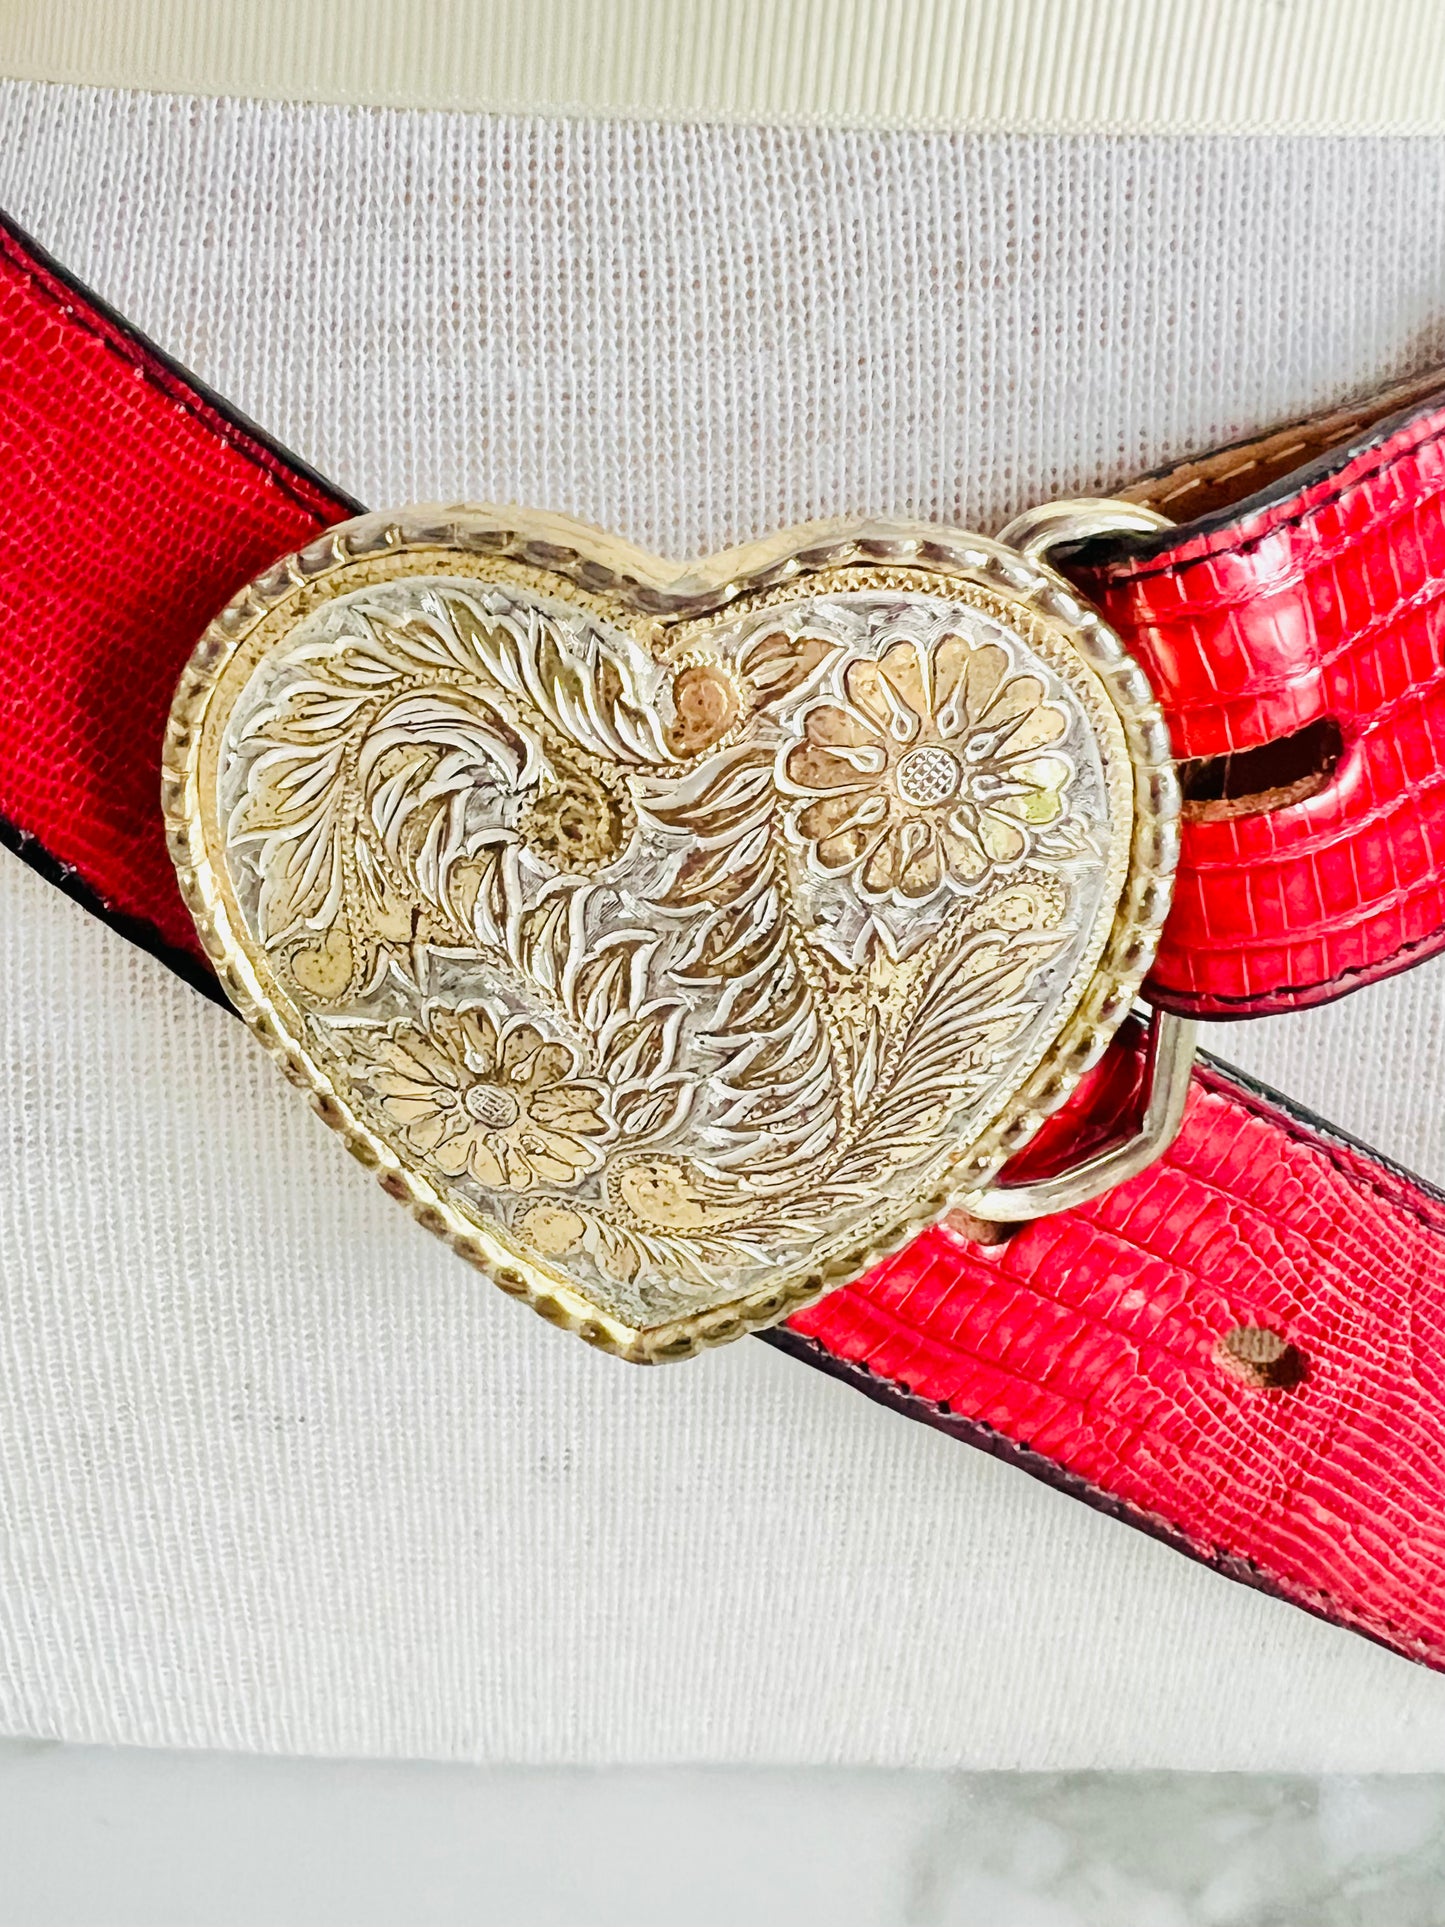 Vintage Tony Lama Leather Belt with Heart Buckle